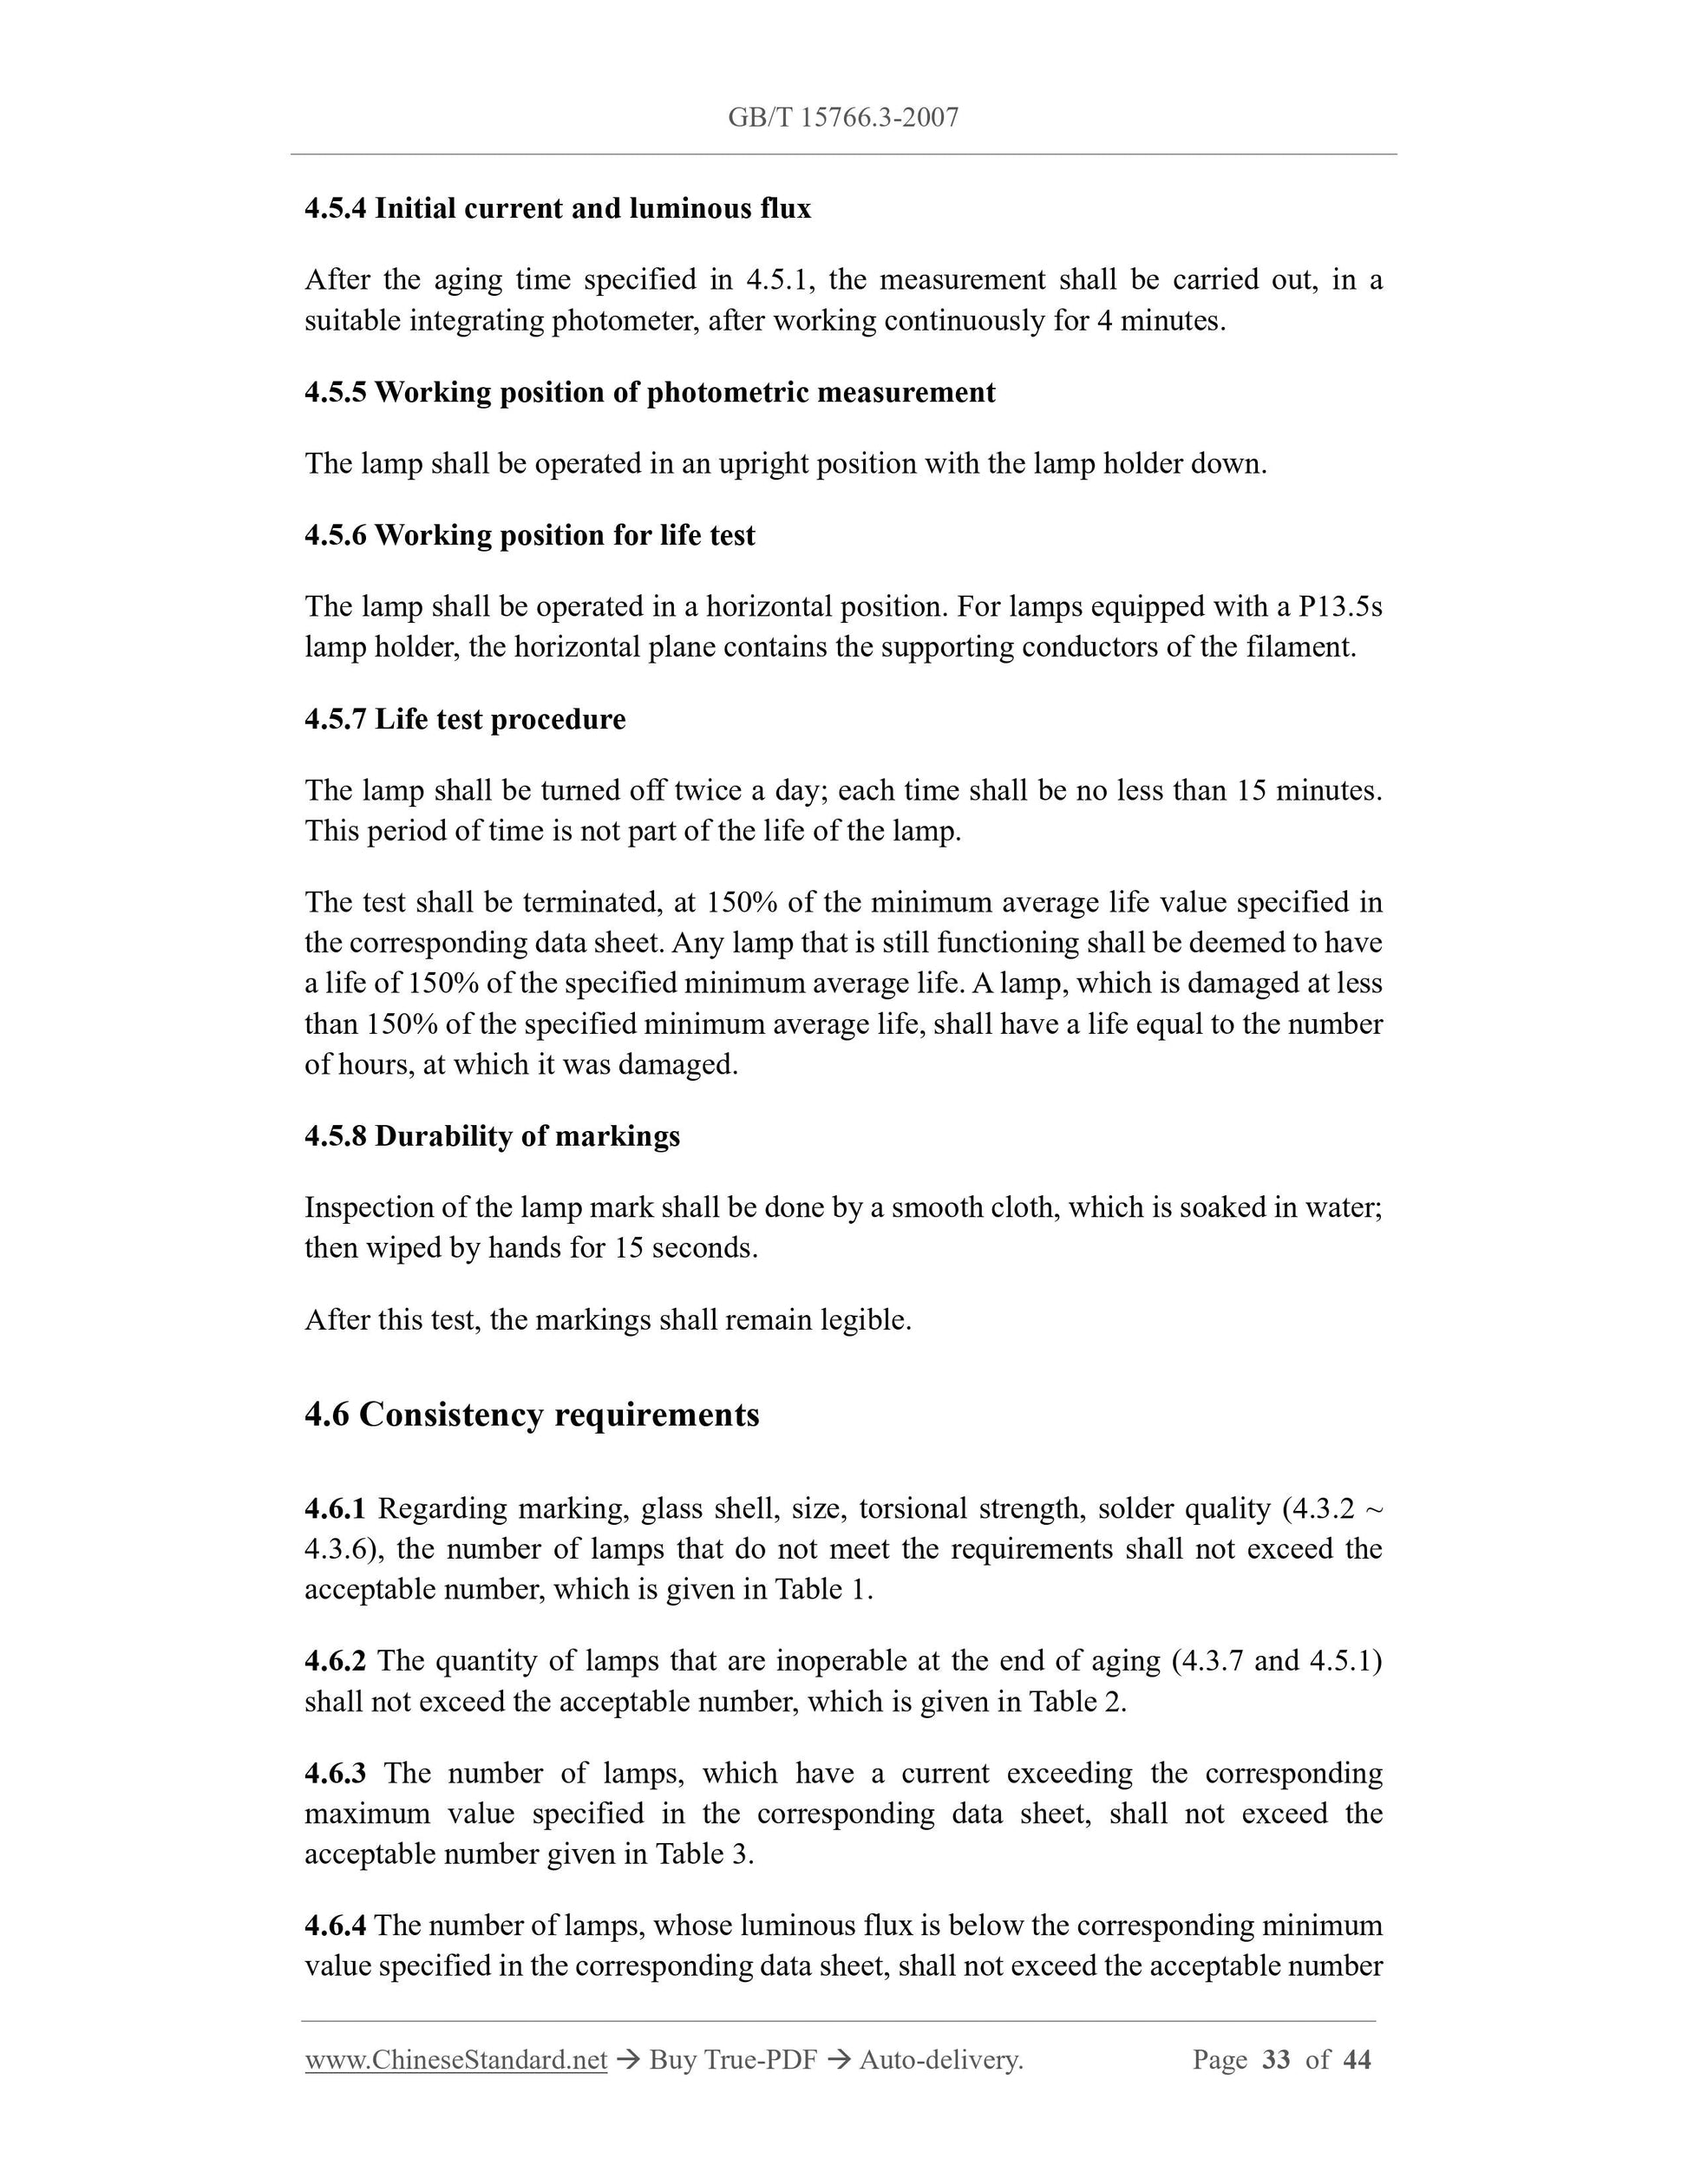 GB/T 15766.3-2007 Page 11